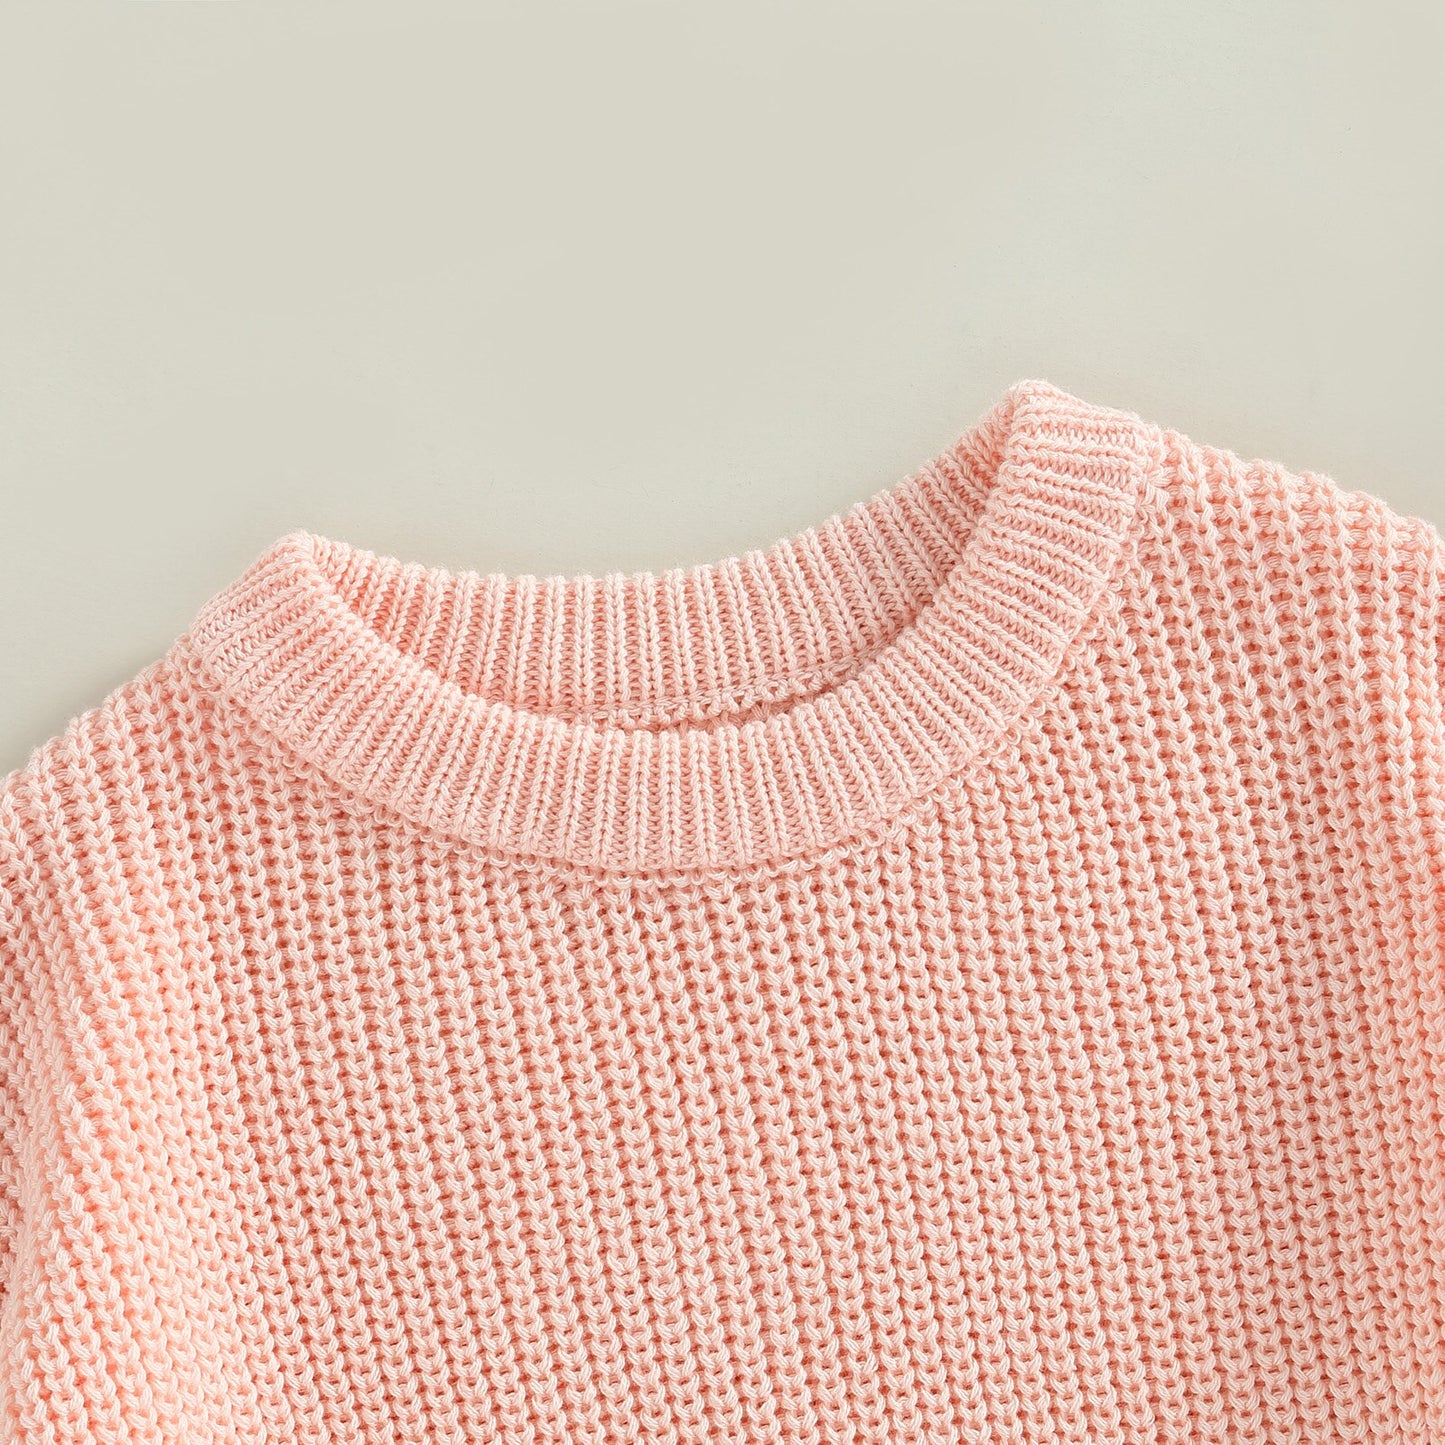 Over + Out Sweater